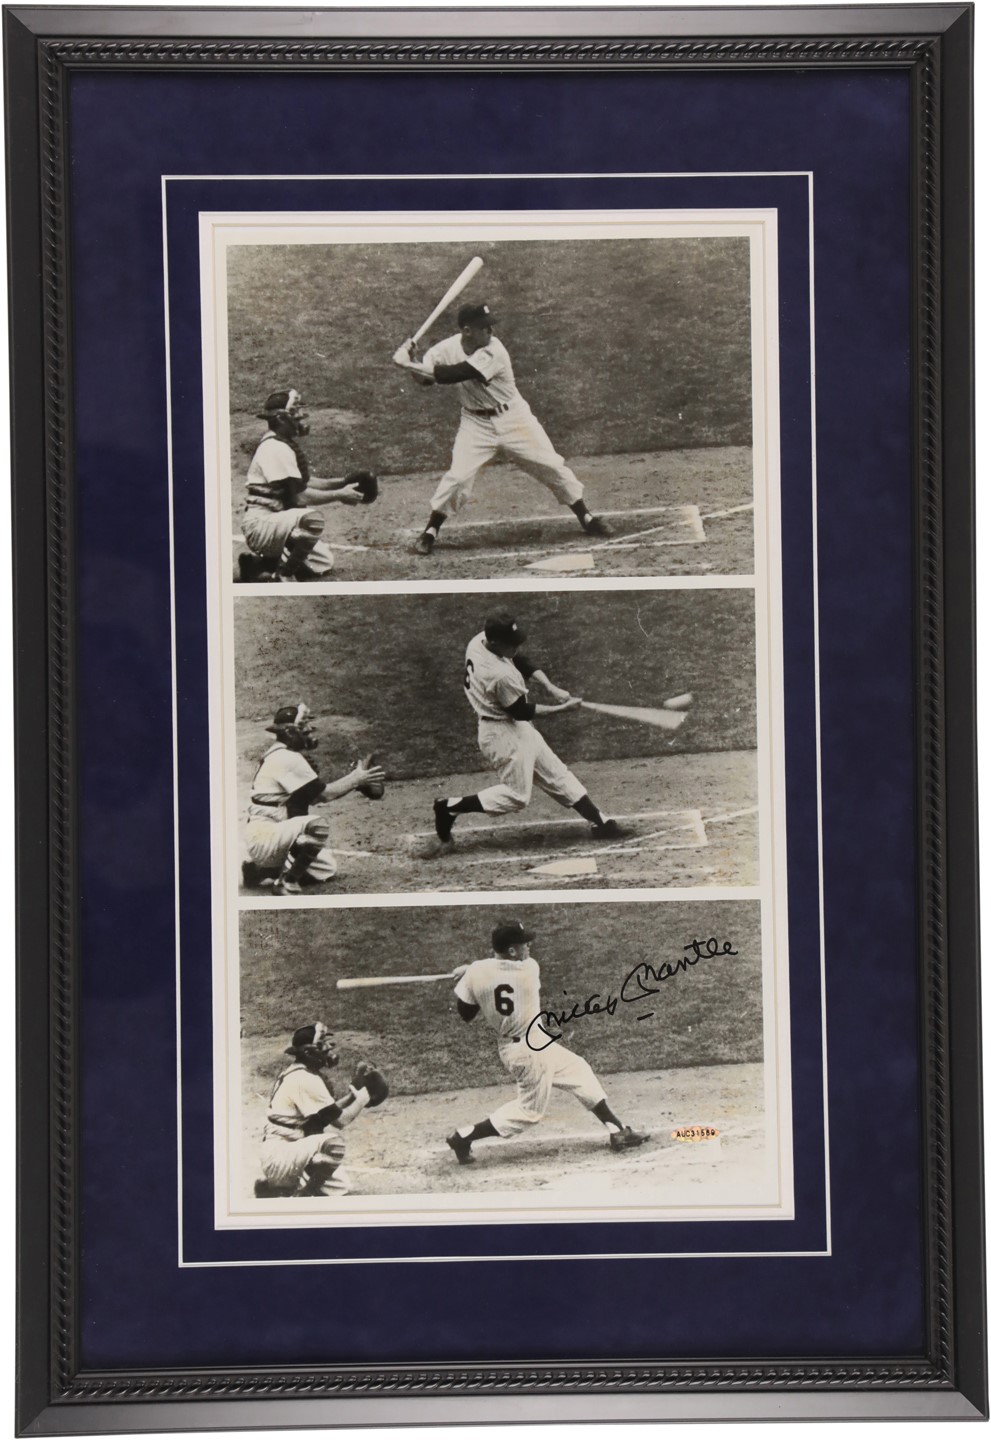 Mantle and Maris - 1951 Mickey Mantle Signed Rookie Photo Montage (UDA) (PSA)